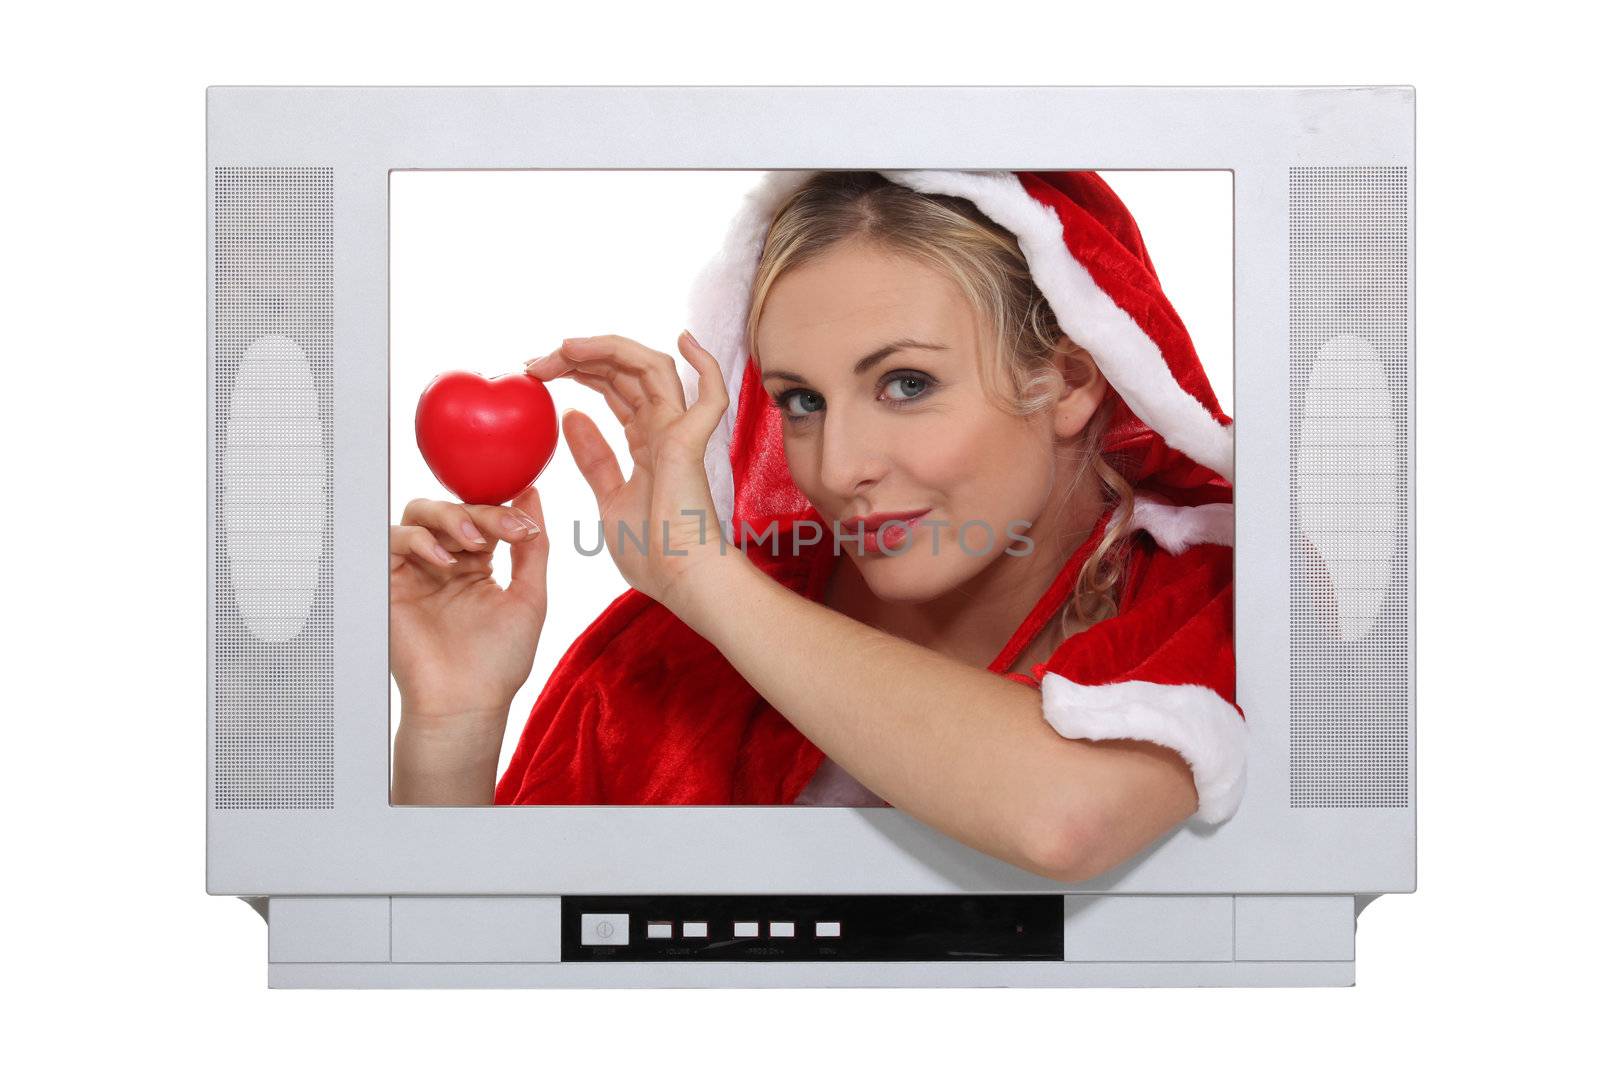 woman wearing a Christmas costume behind a TV screen by phovoir